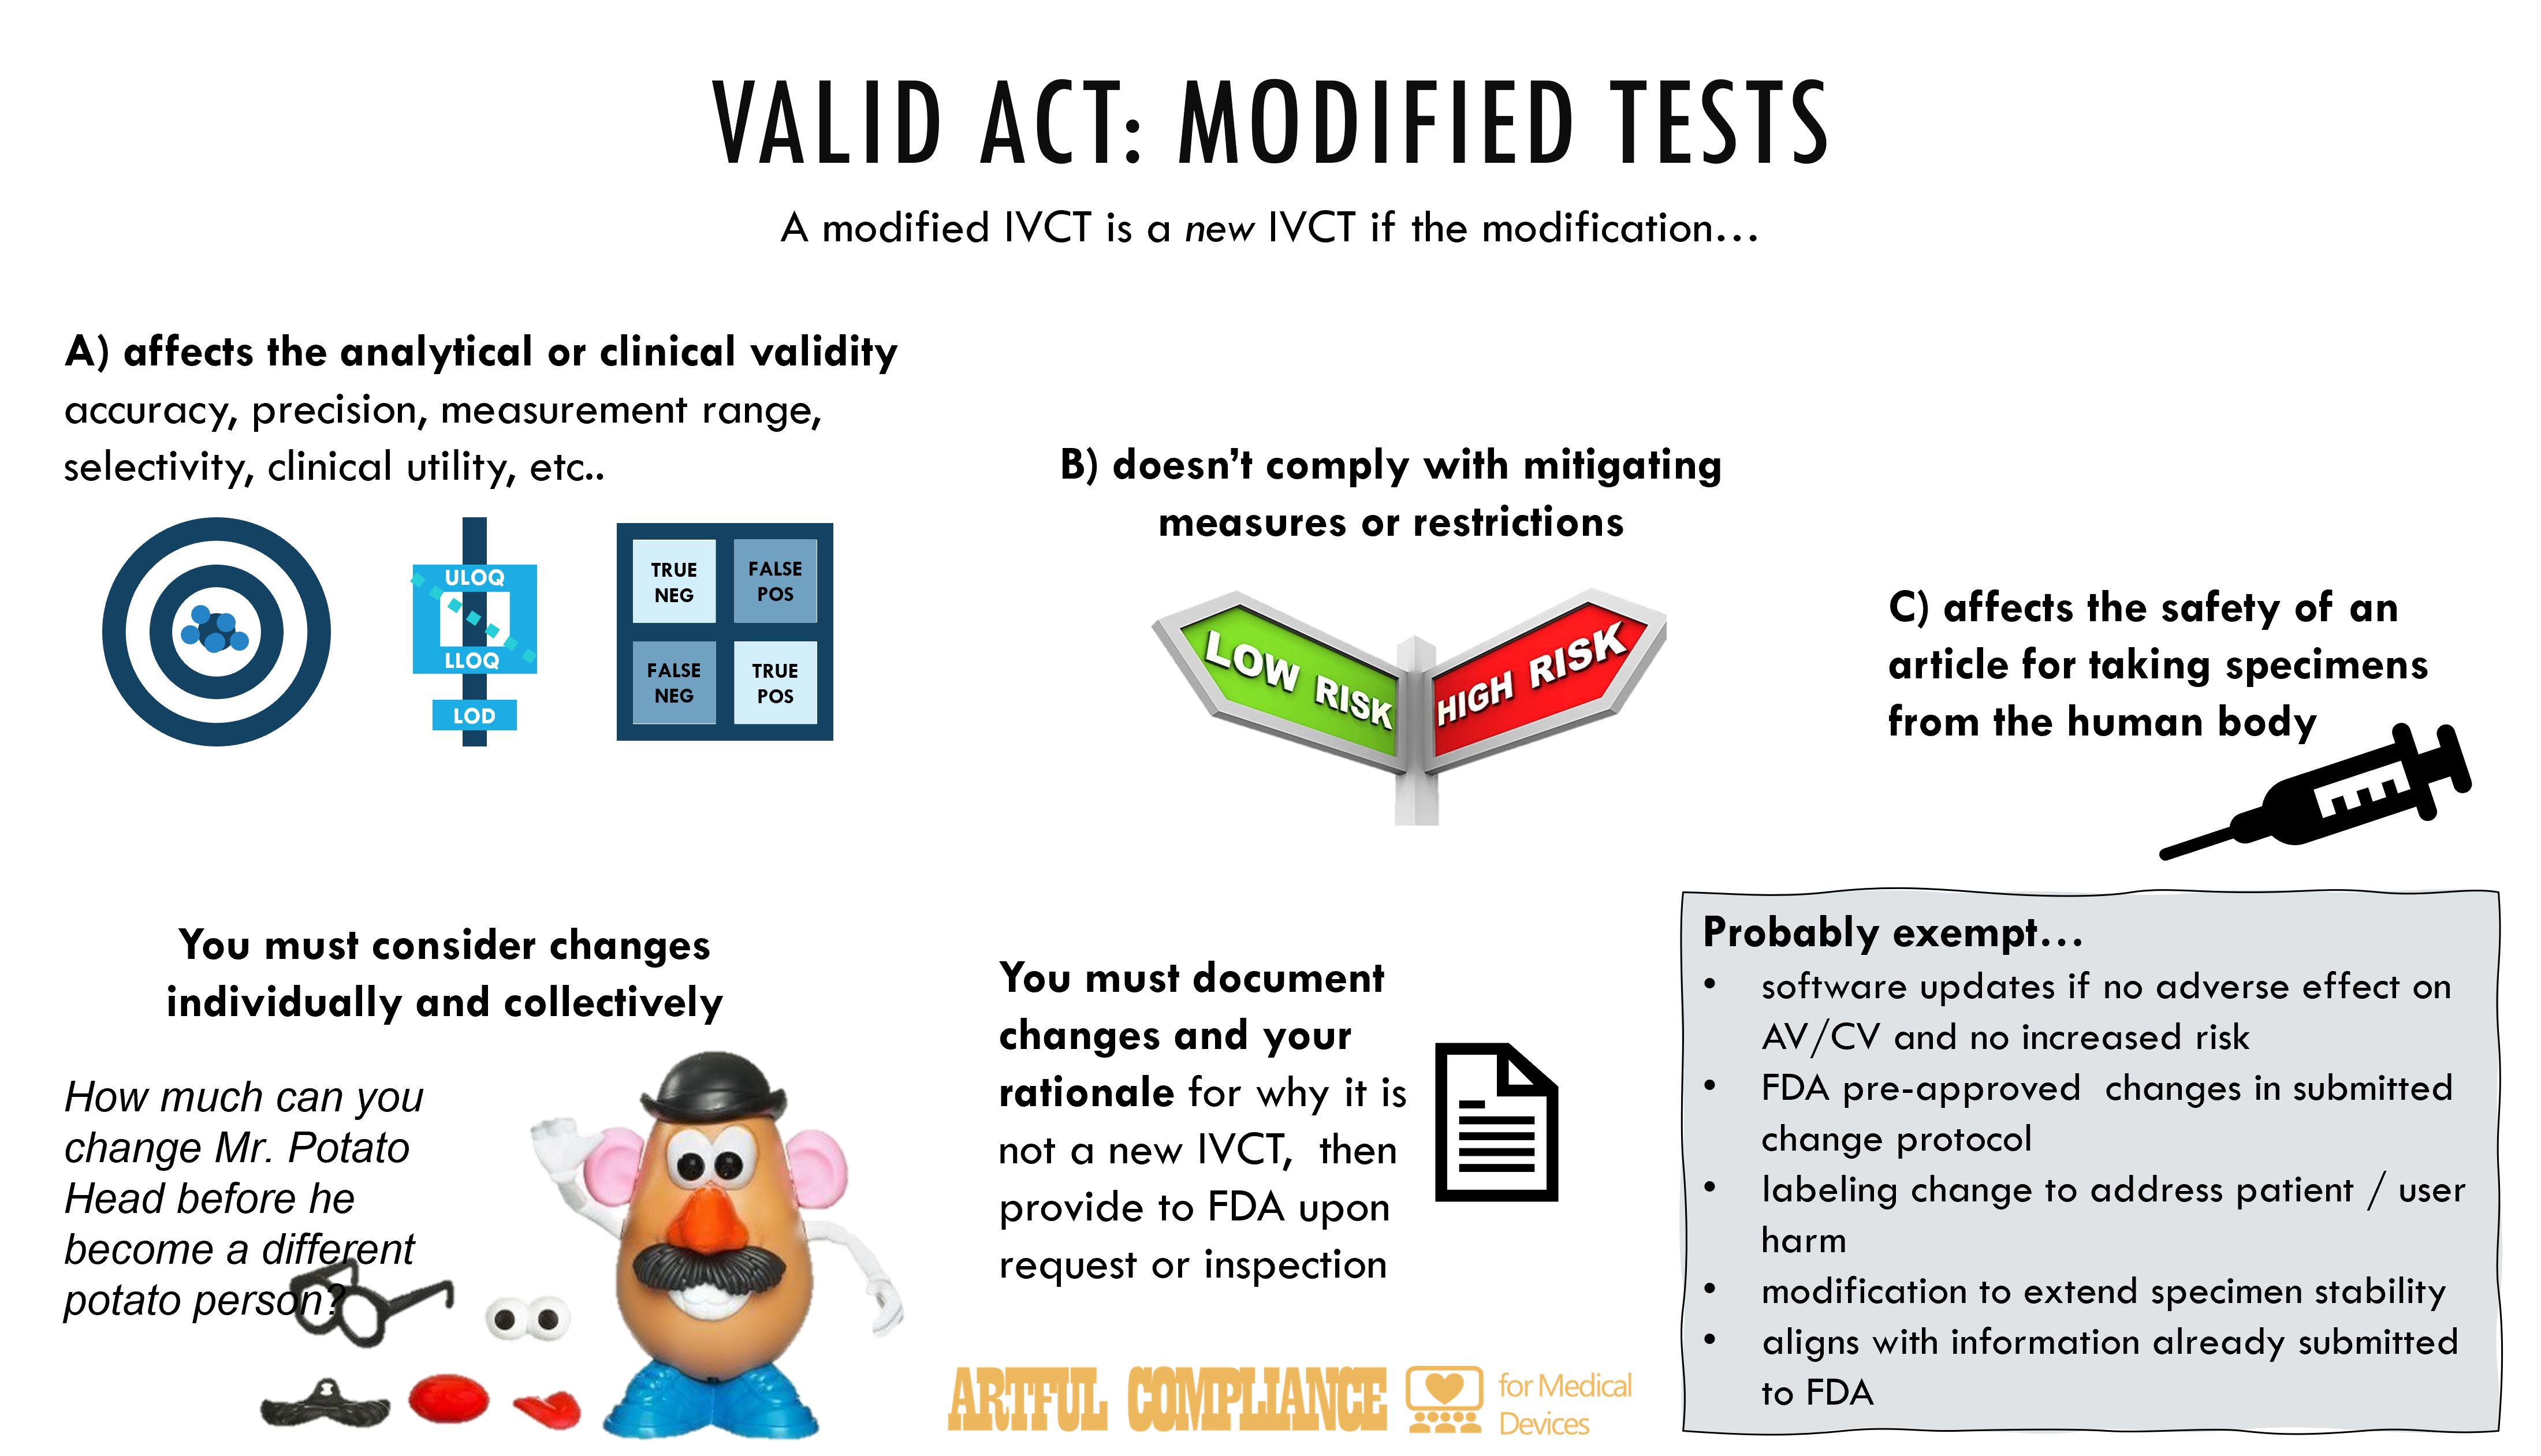 00080 VALID Act Modified Tests